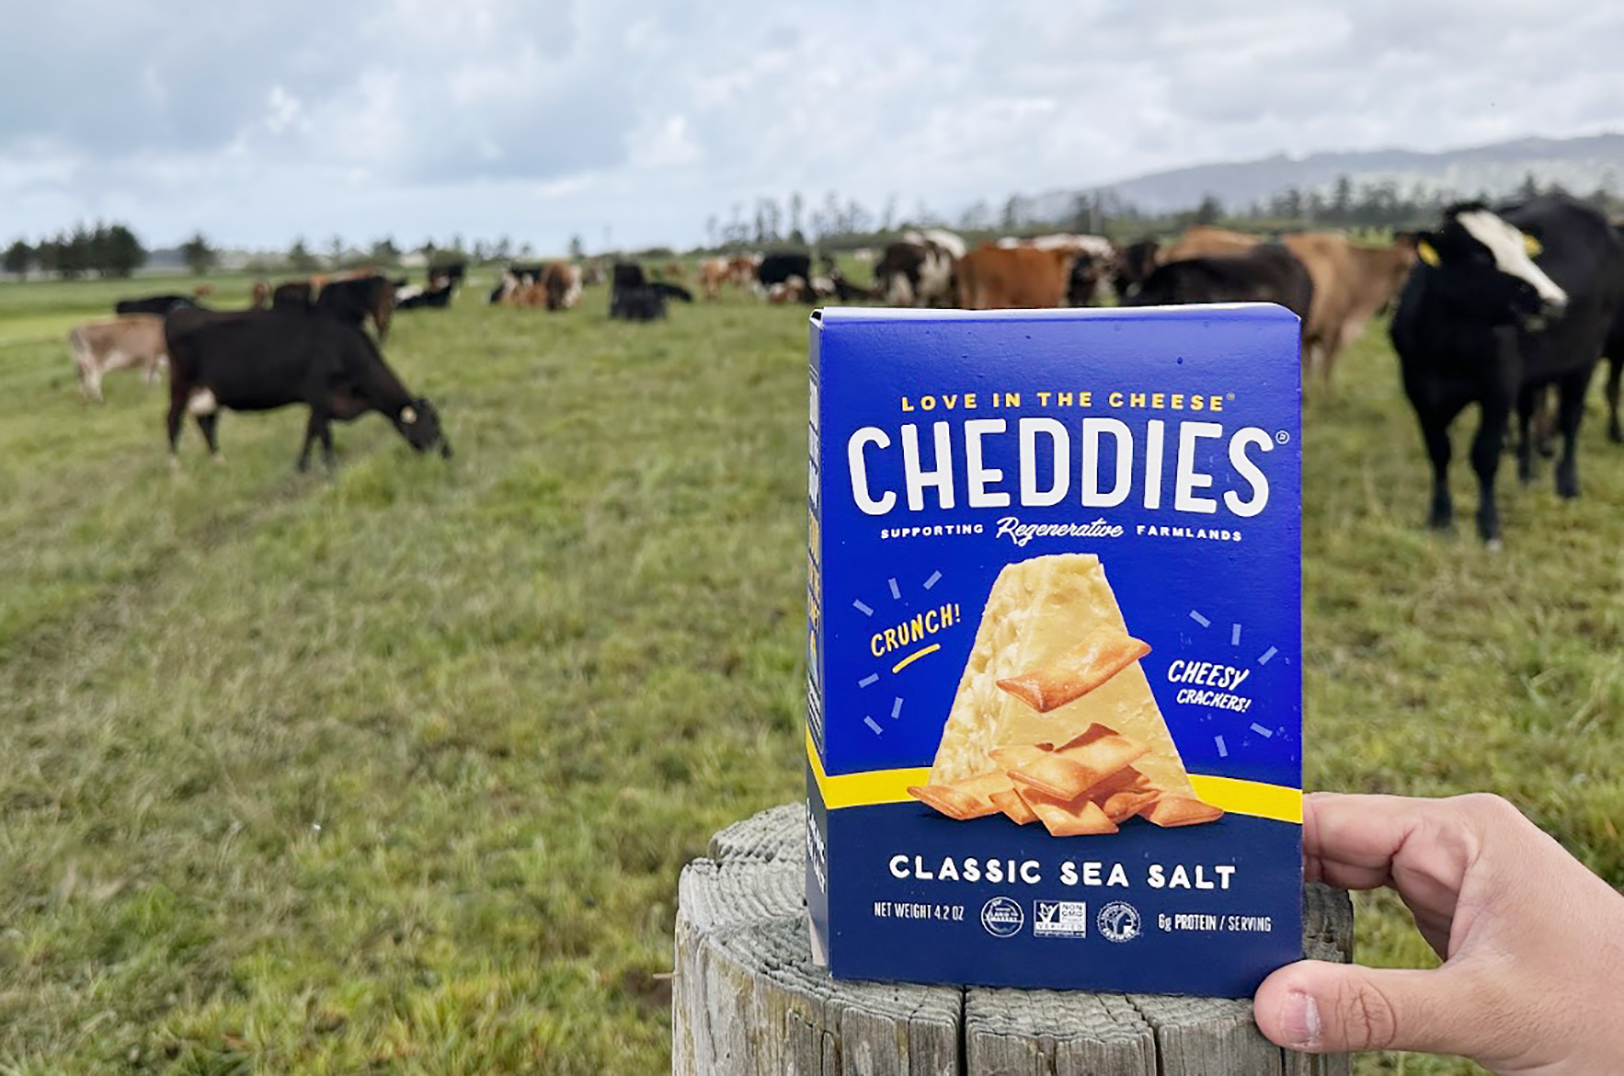 KC-baked snack cracker startup tastes new markets, opportunities fueled by regenerative agriculture